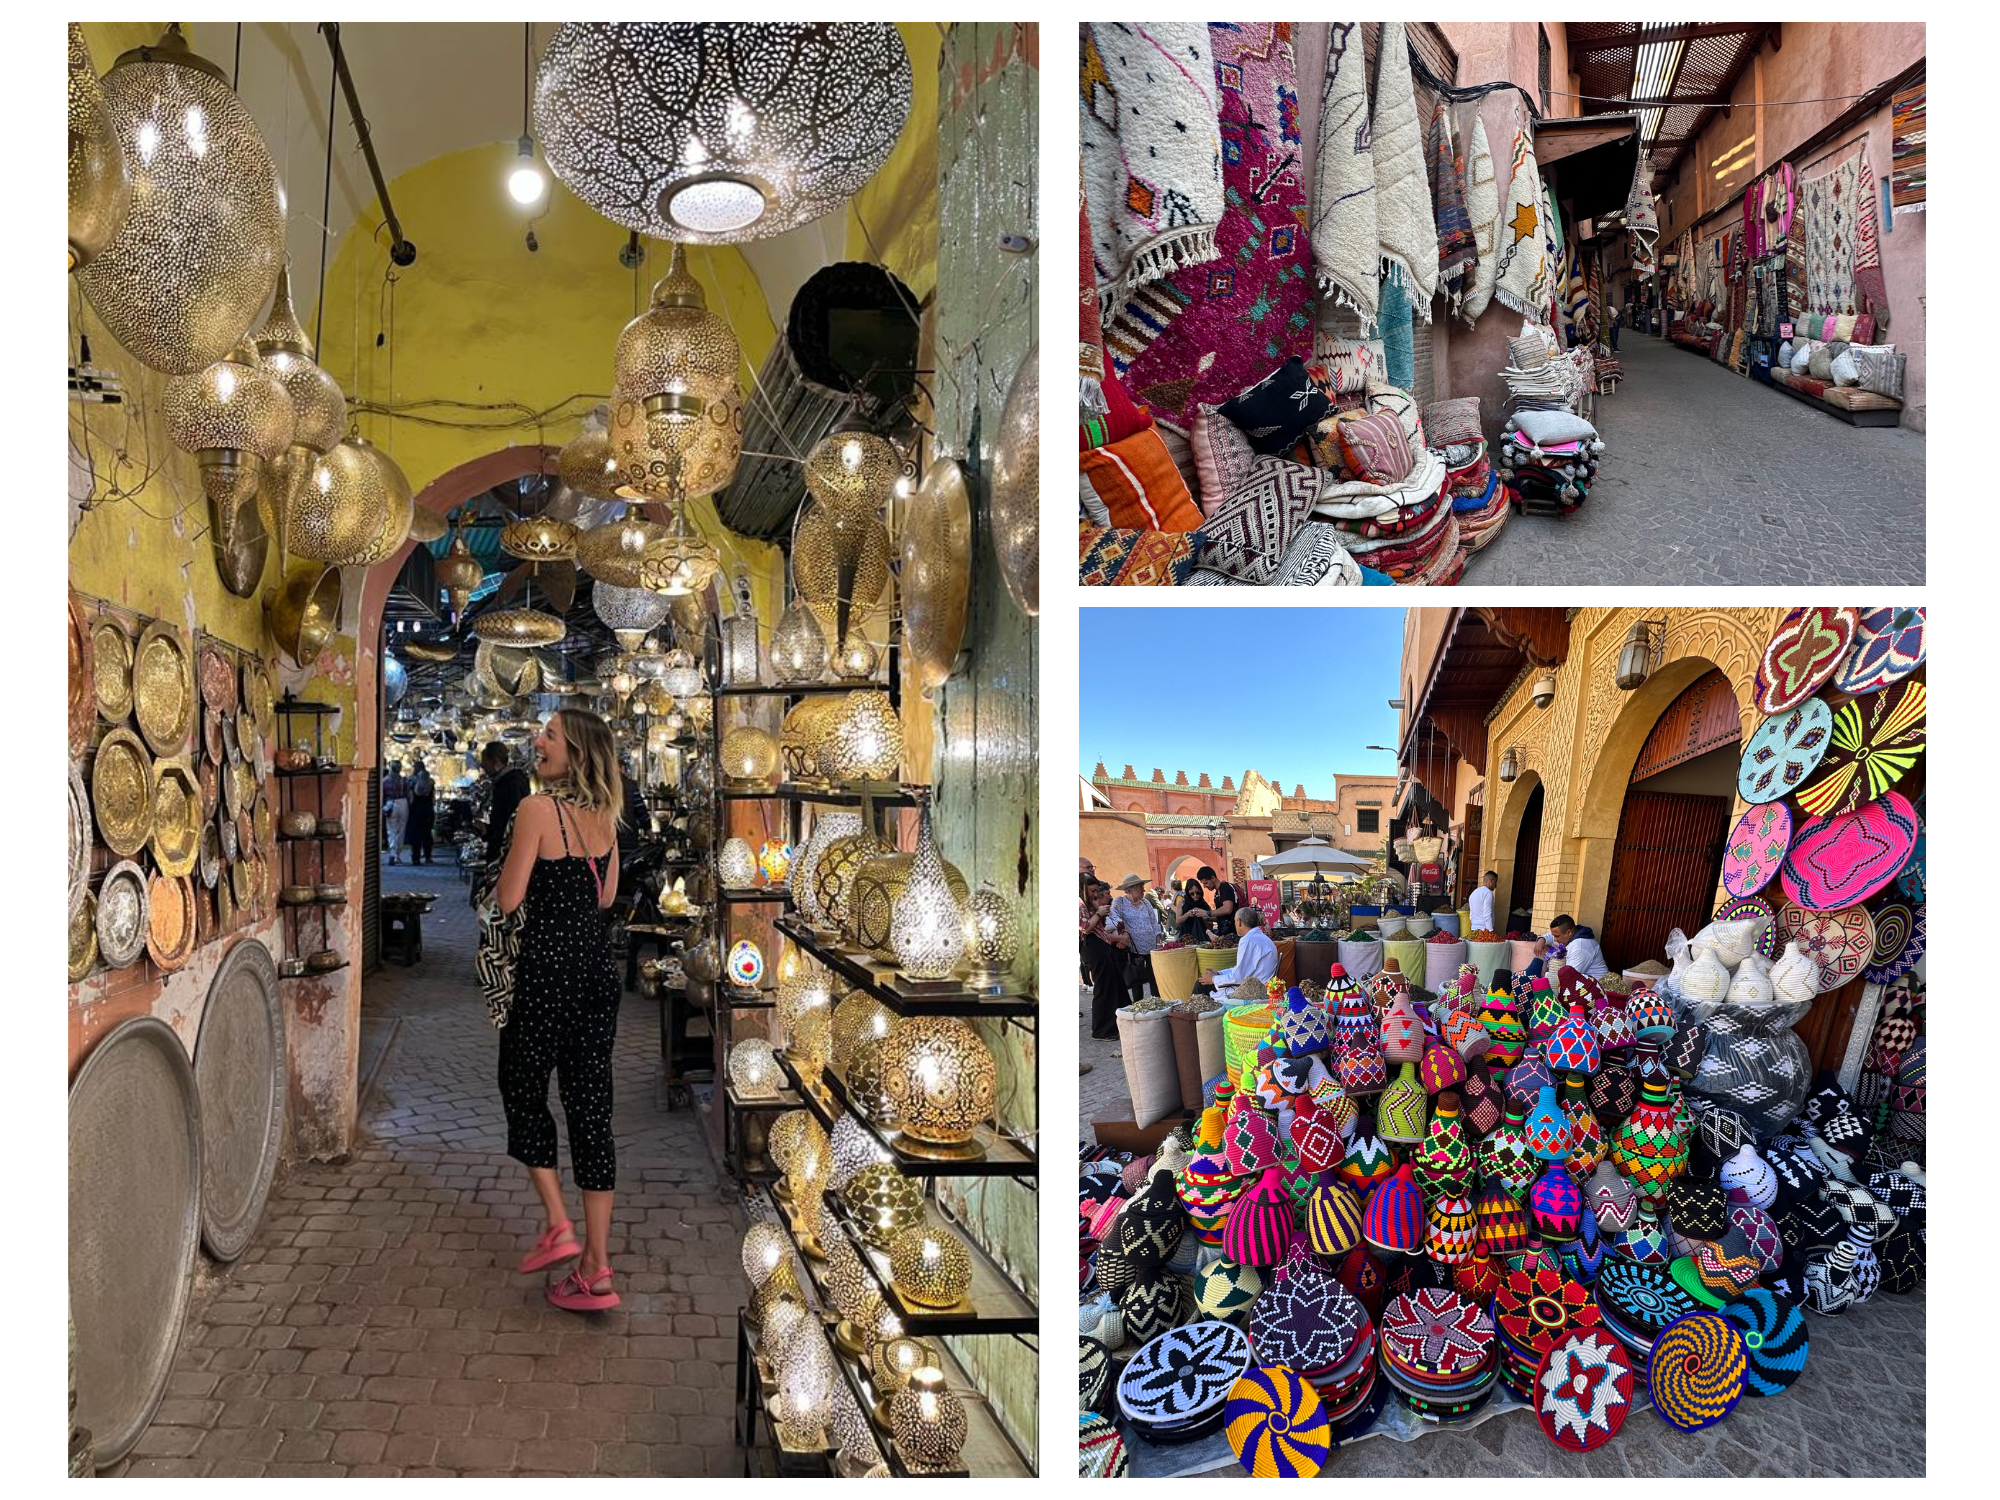 Euphoric Threads Travel Blog - Euphoric Escapades - The Adventures of Griffindor - The Ultimate Travel Guide to Shopping in Morocco. Marrakech shopping guide 